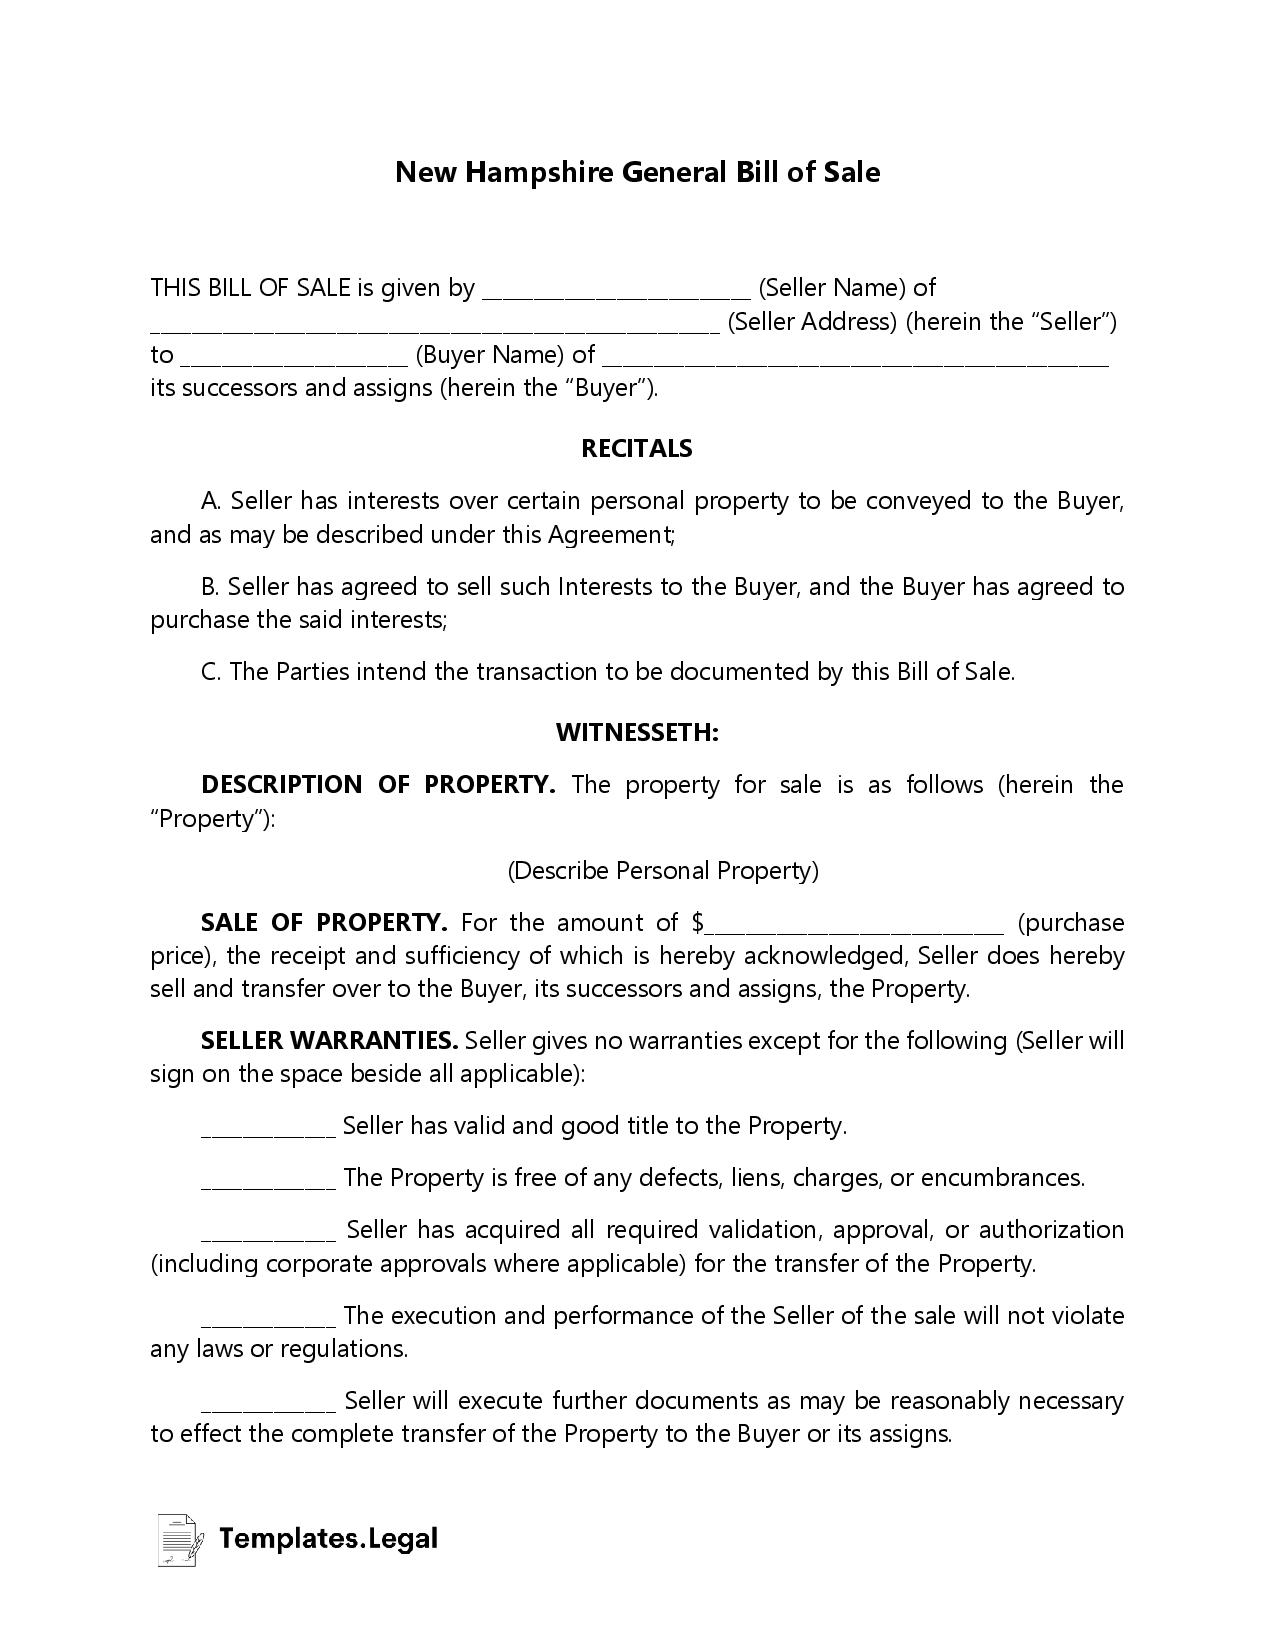 New Hampshire General Bill of Sale - Templates.Legal